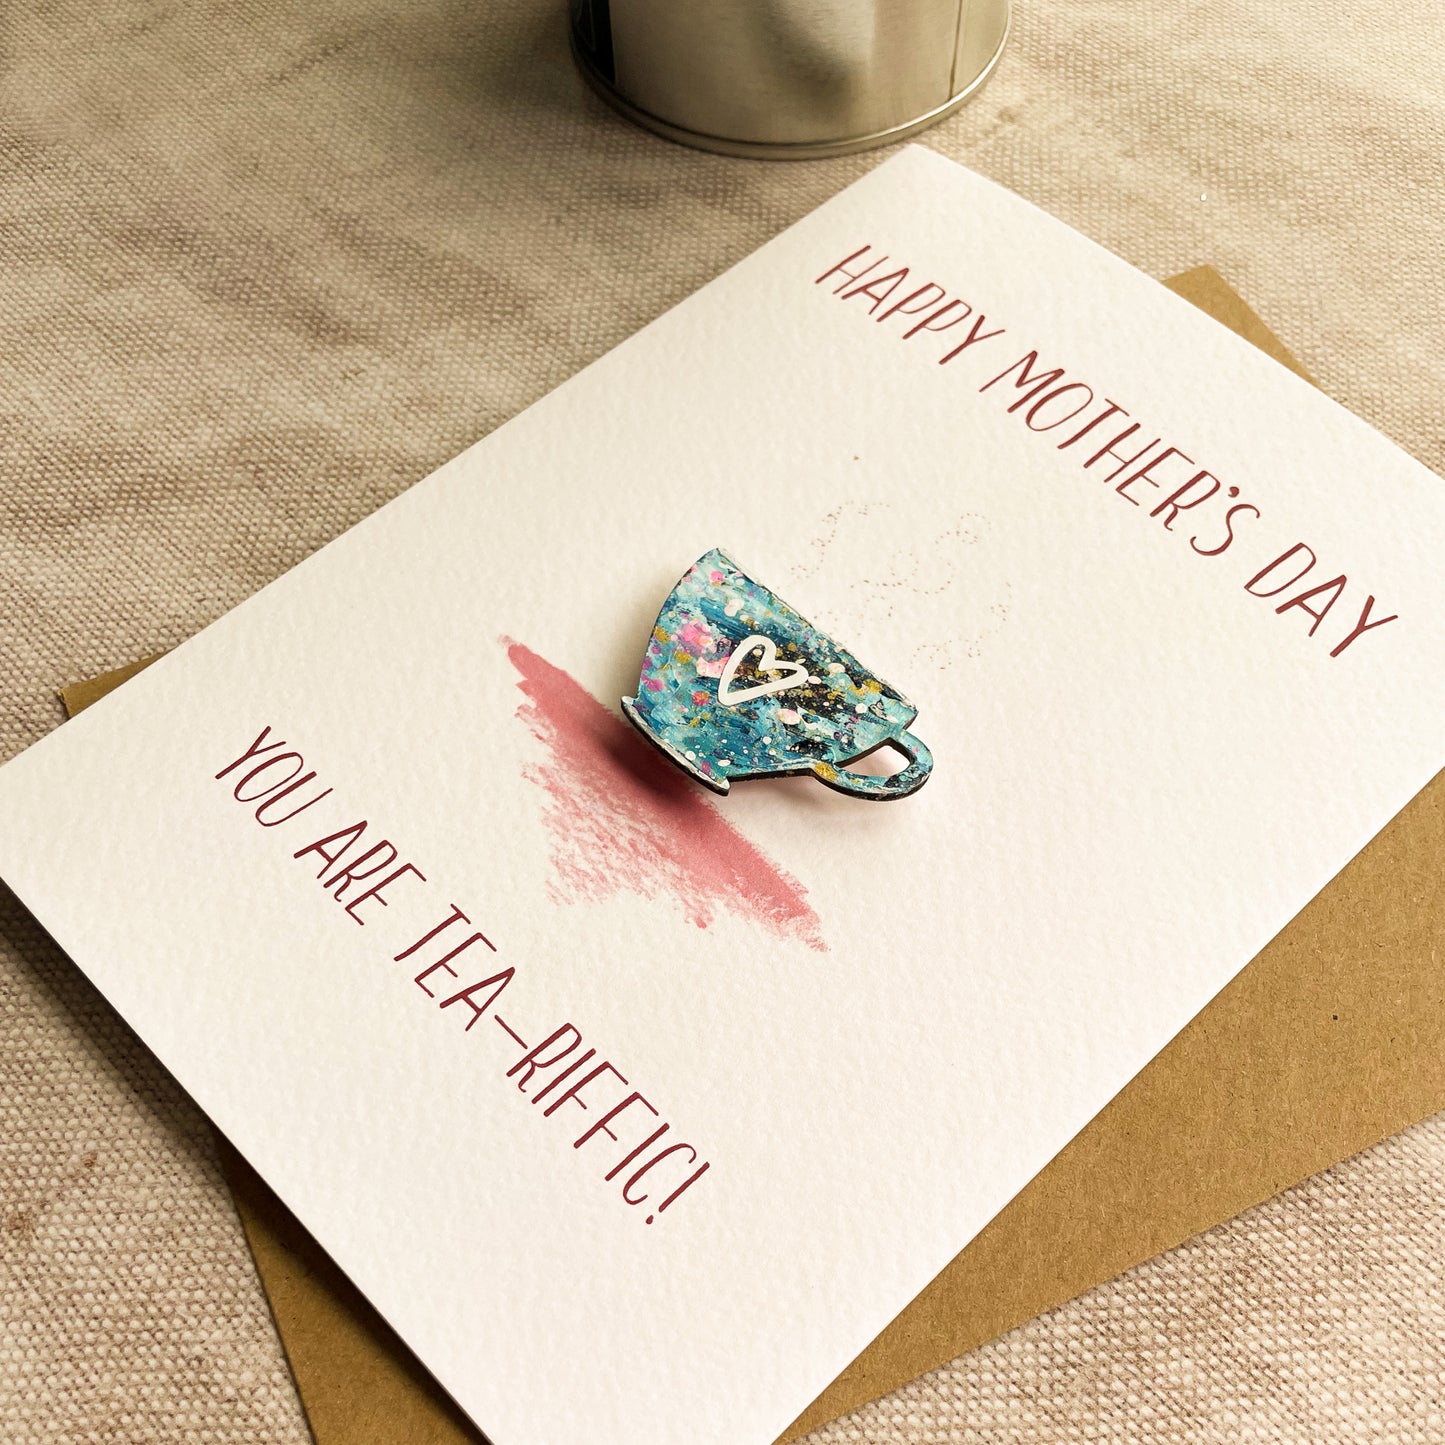 Magnet Keepsake & Mother's Day Card - You're Tea-riffic!